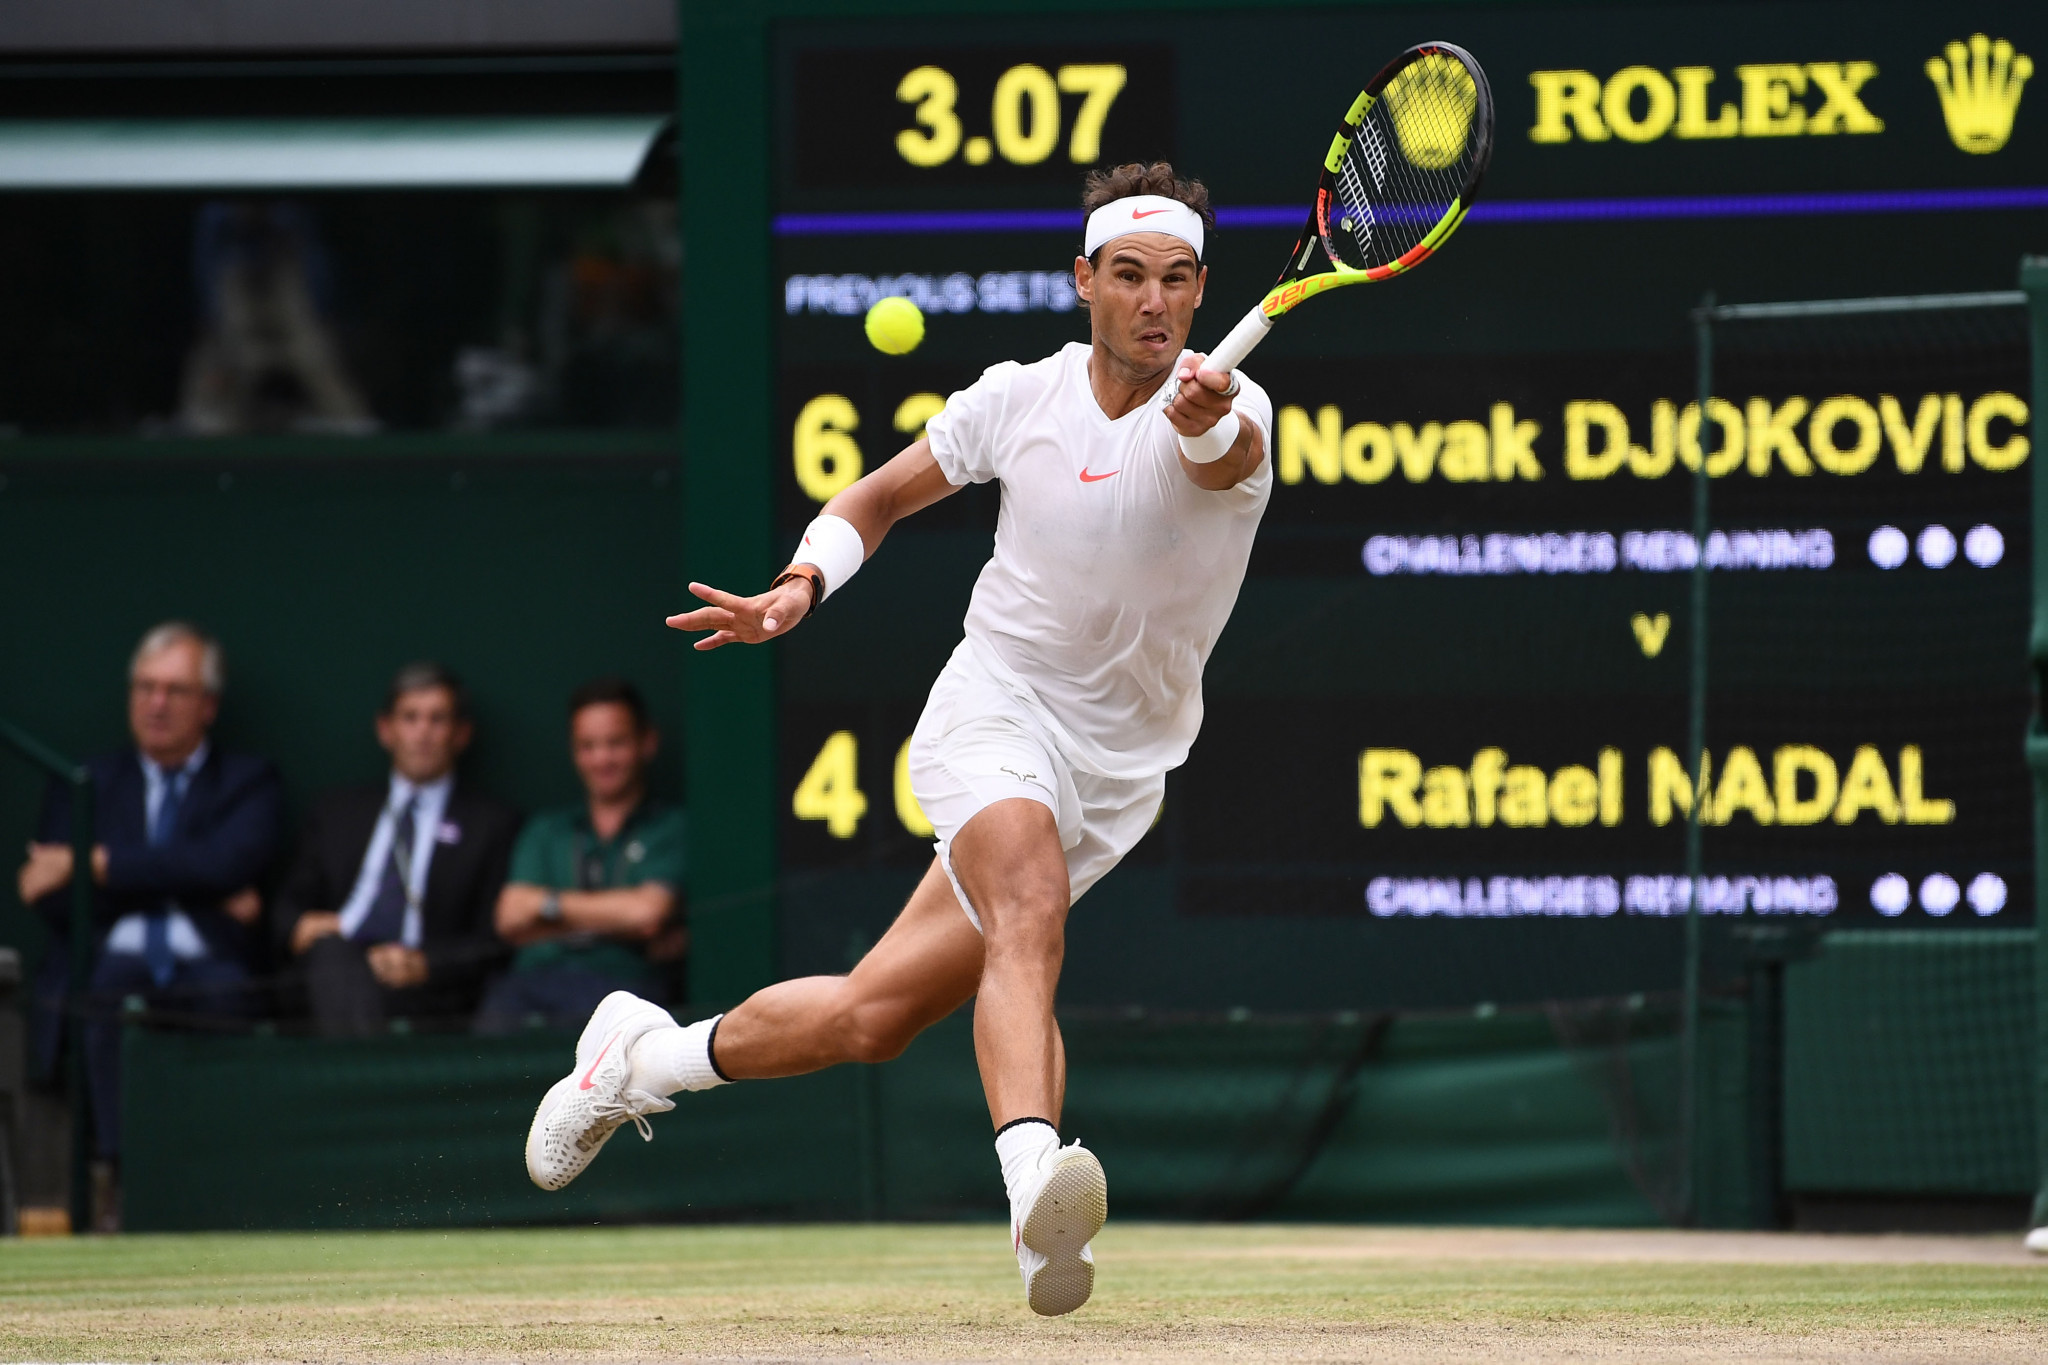 Rafael Nadal has joined criticism of Wimbledon banning players from Russia and Belarus ©Getty Images